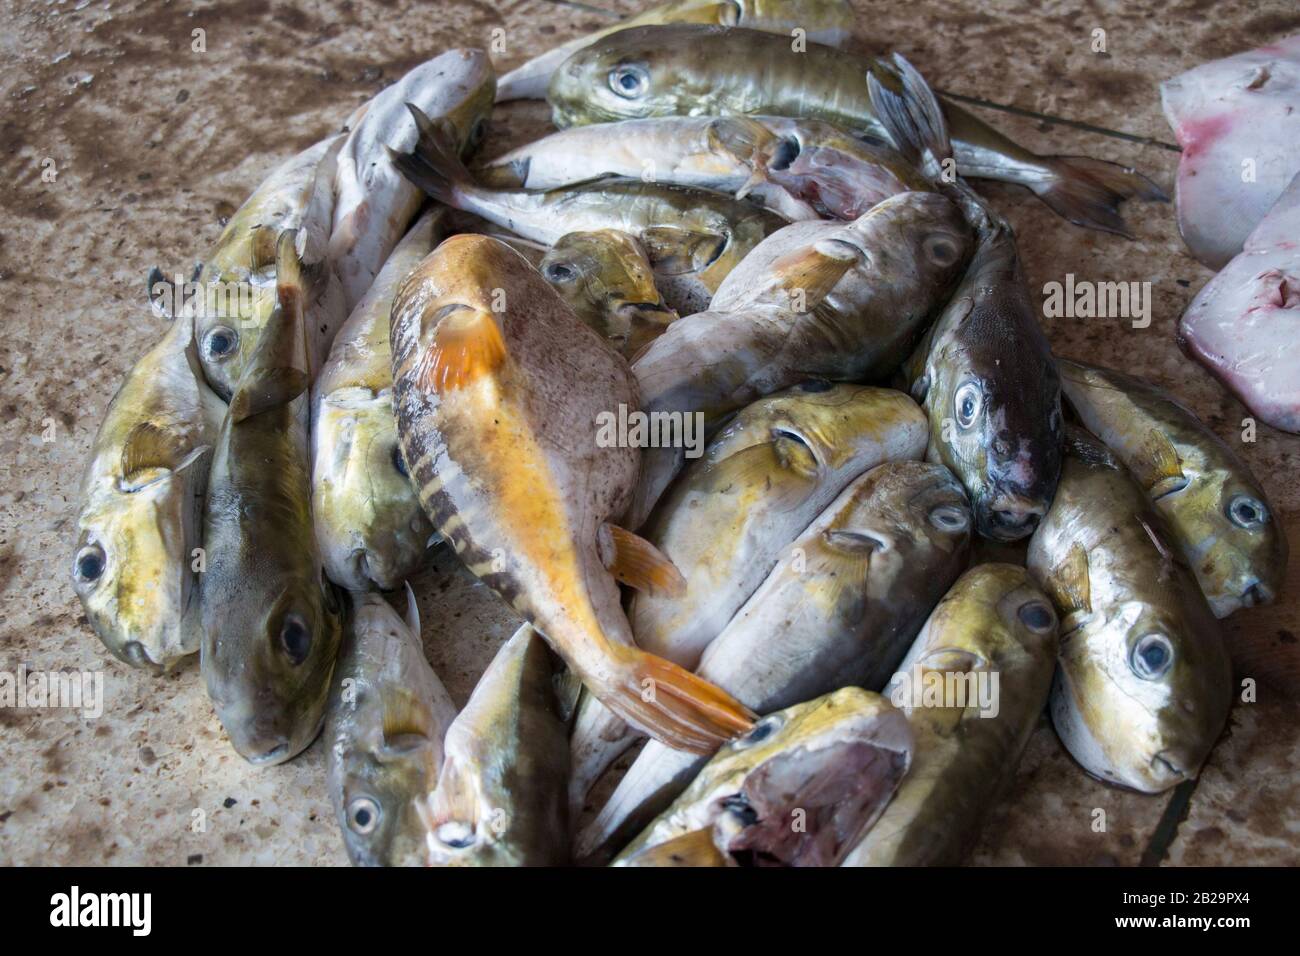 Green puffer fish catch from the sea by Fisher men in Cox's Bazaar, Bangladesh.  The green puffer fish is a species of puffer fish found in South. Stock Photo